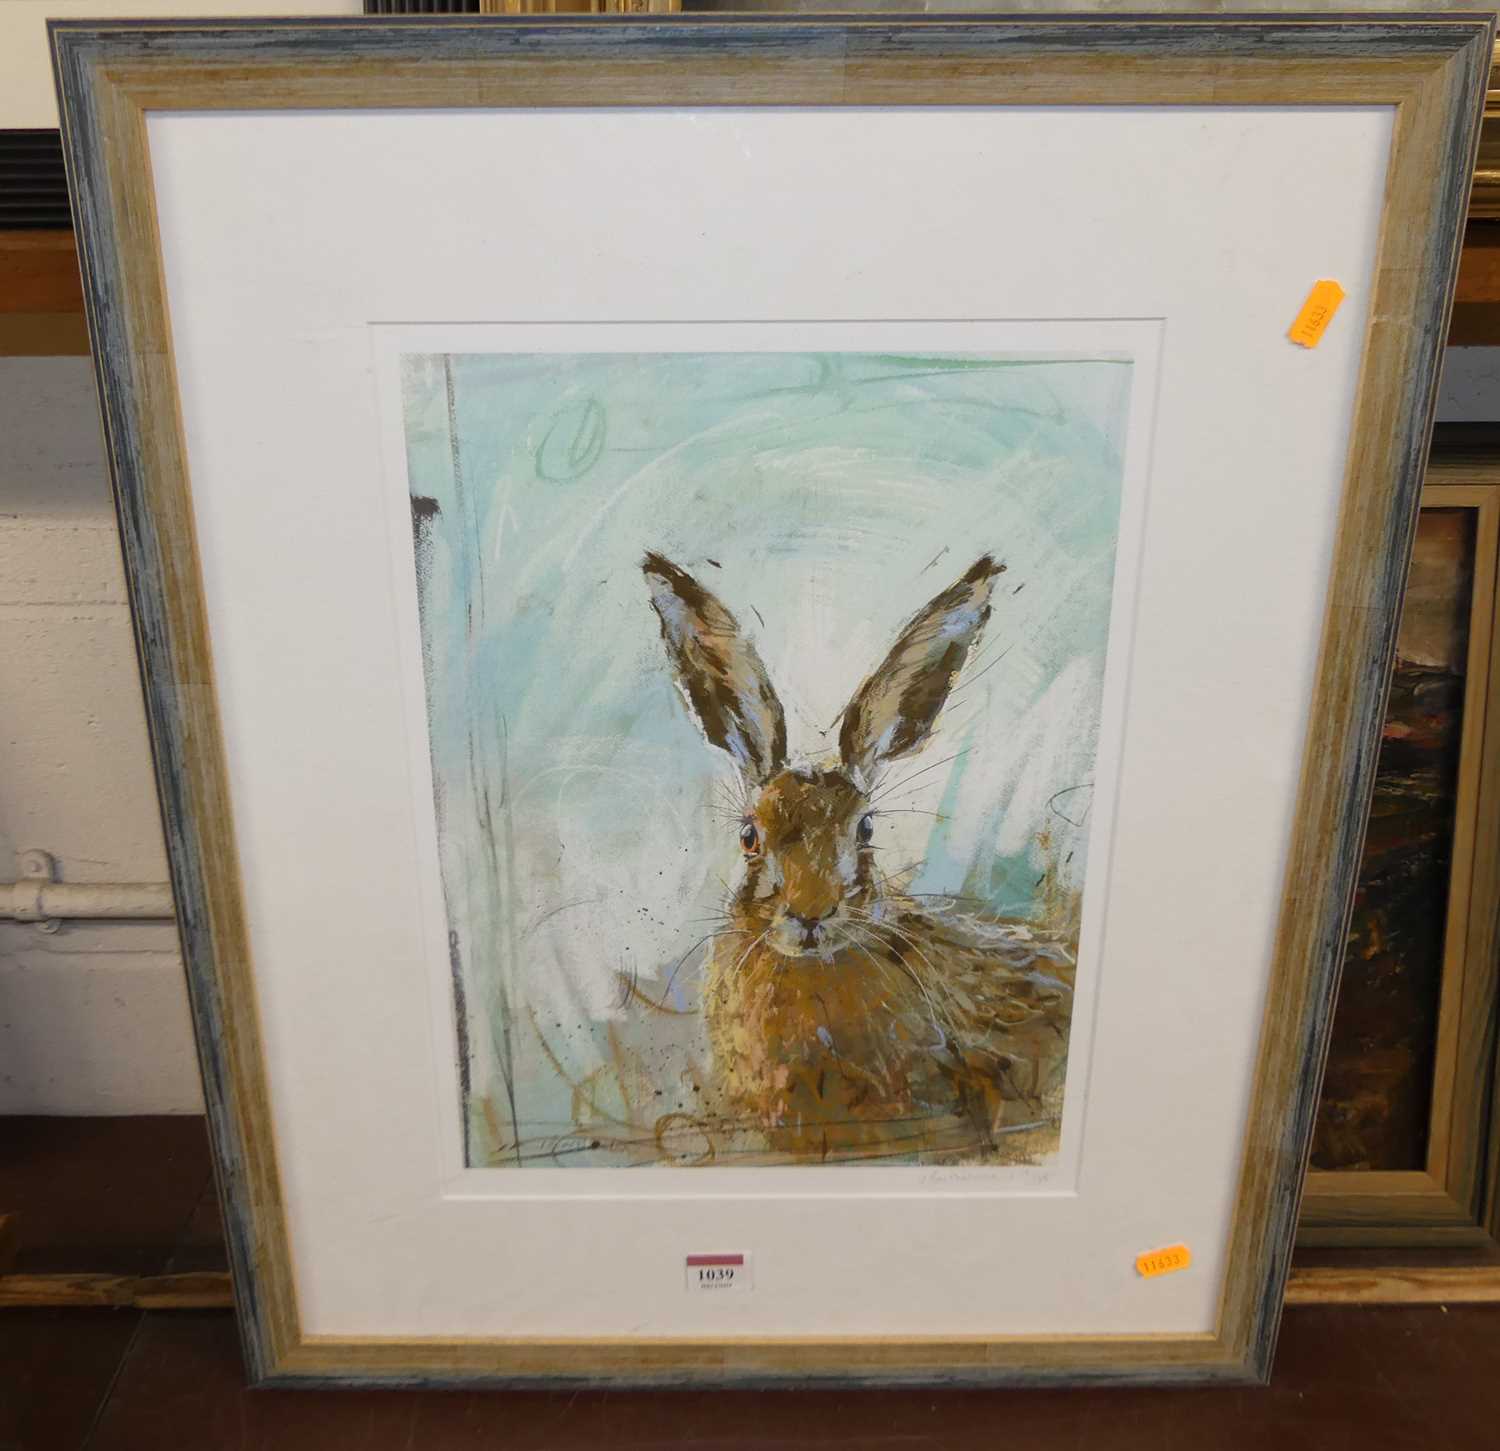 J. Bartholemew - Study of a hare, lithograph, signed and numbered 68/195 in pencil to the margin, 37